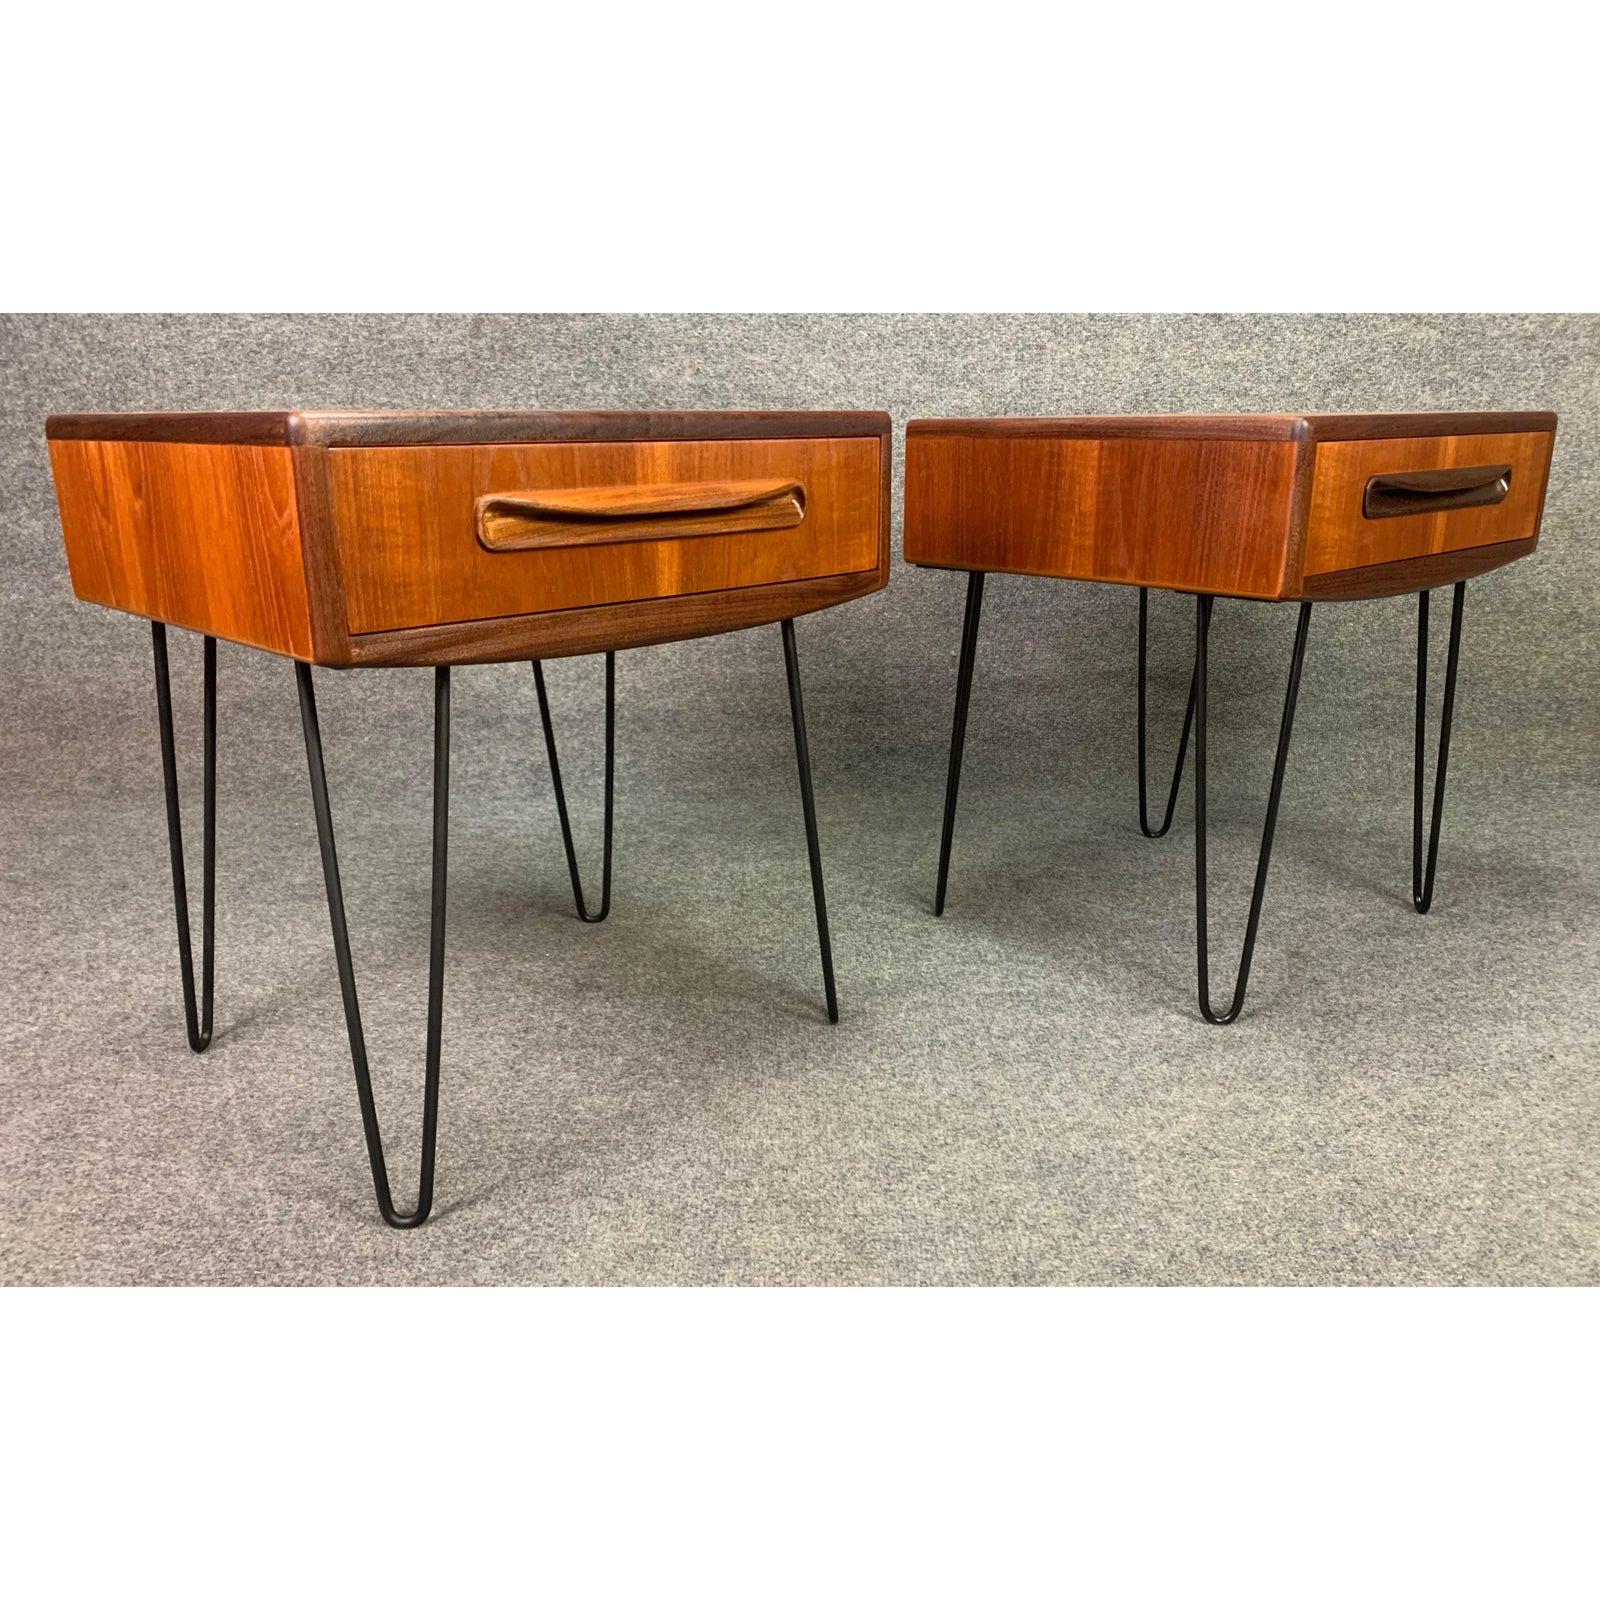 Here is a beautiful set of two 1960s Mid-Century Modern side tables - nightstands in teak wood designed by Victor Wilkins and manufactured by G Plan in England.
This pair, recently imported from UK to California before their restoration, features a